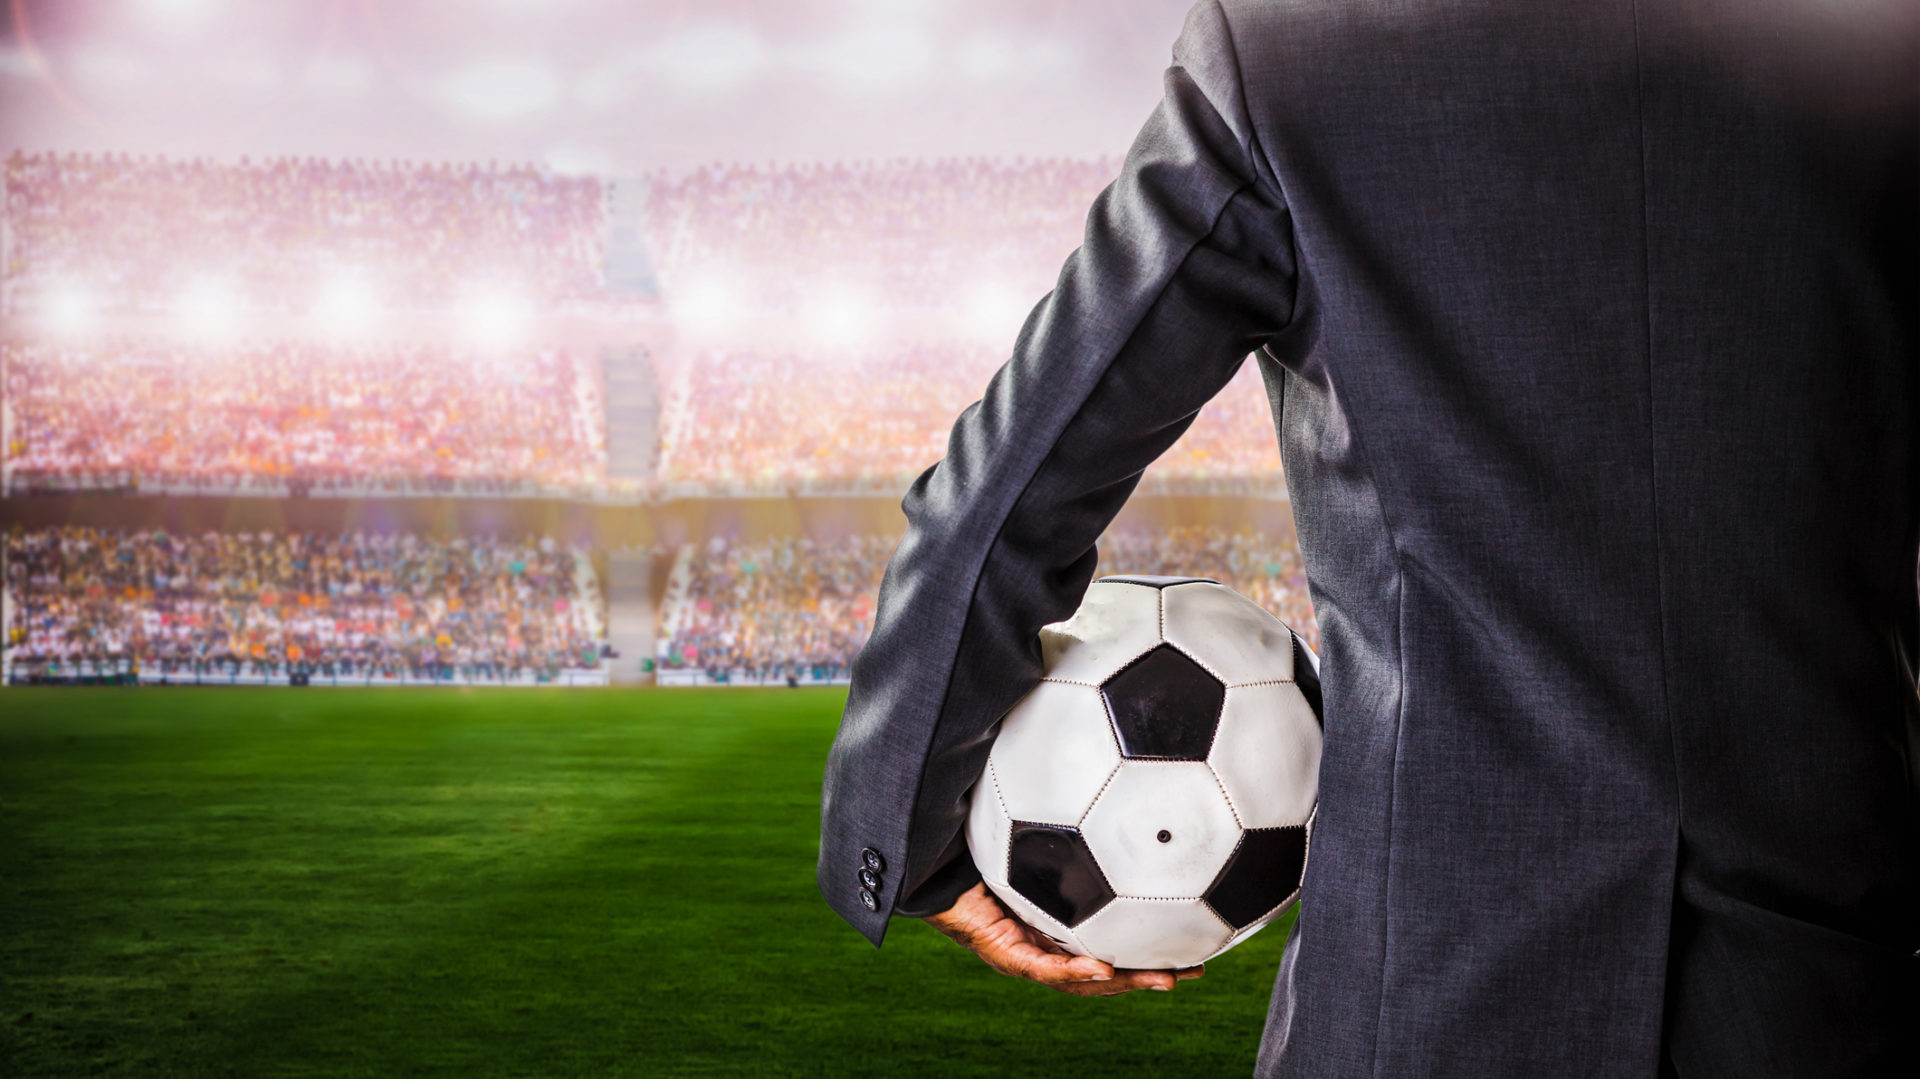 soccer manager against supporters in the stadium